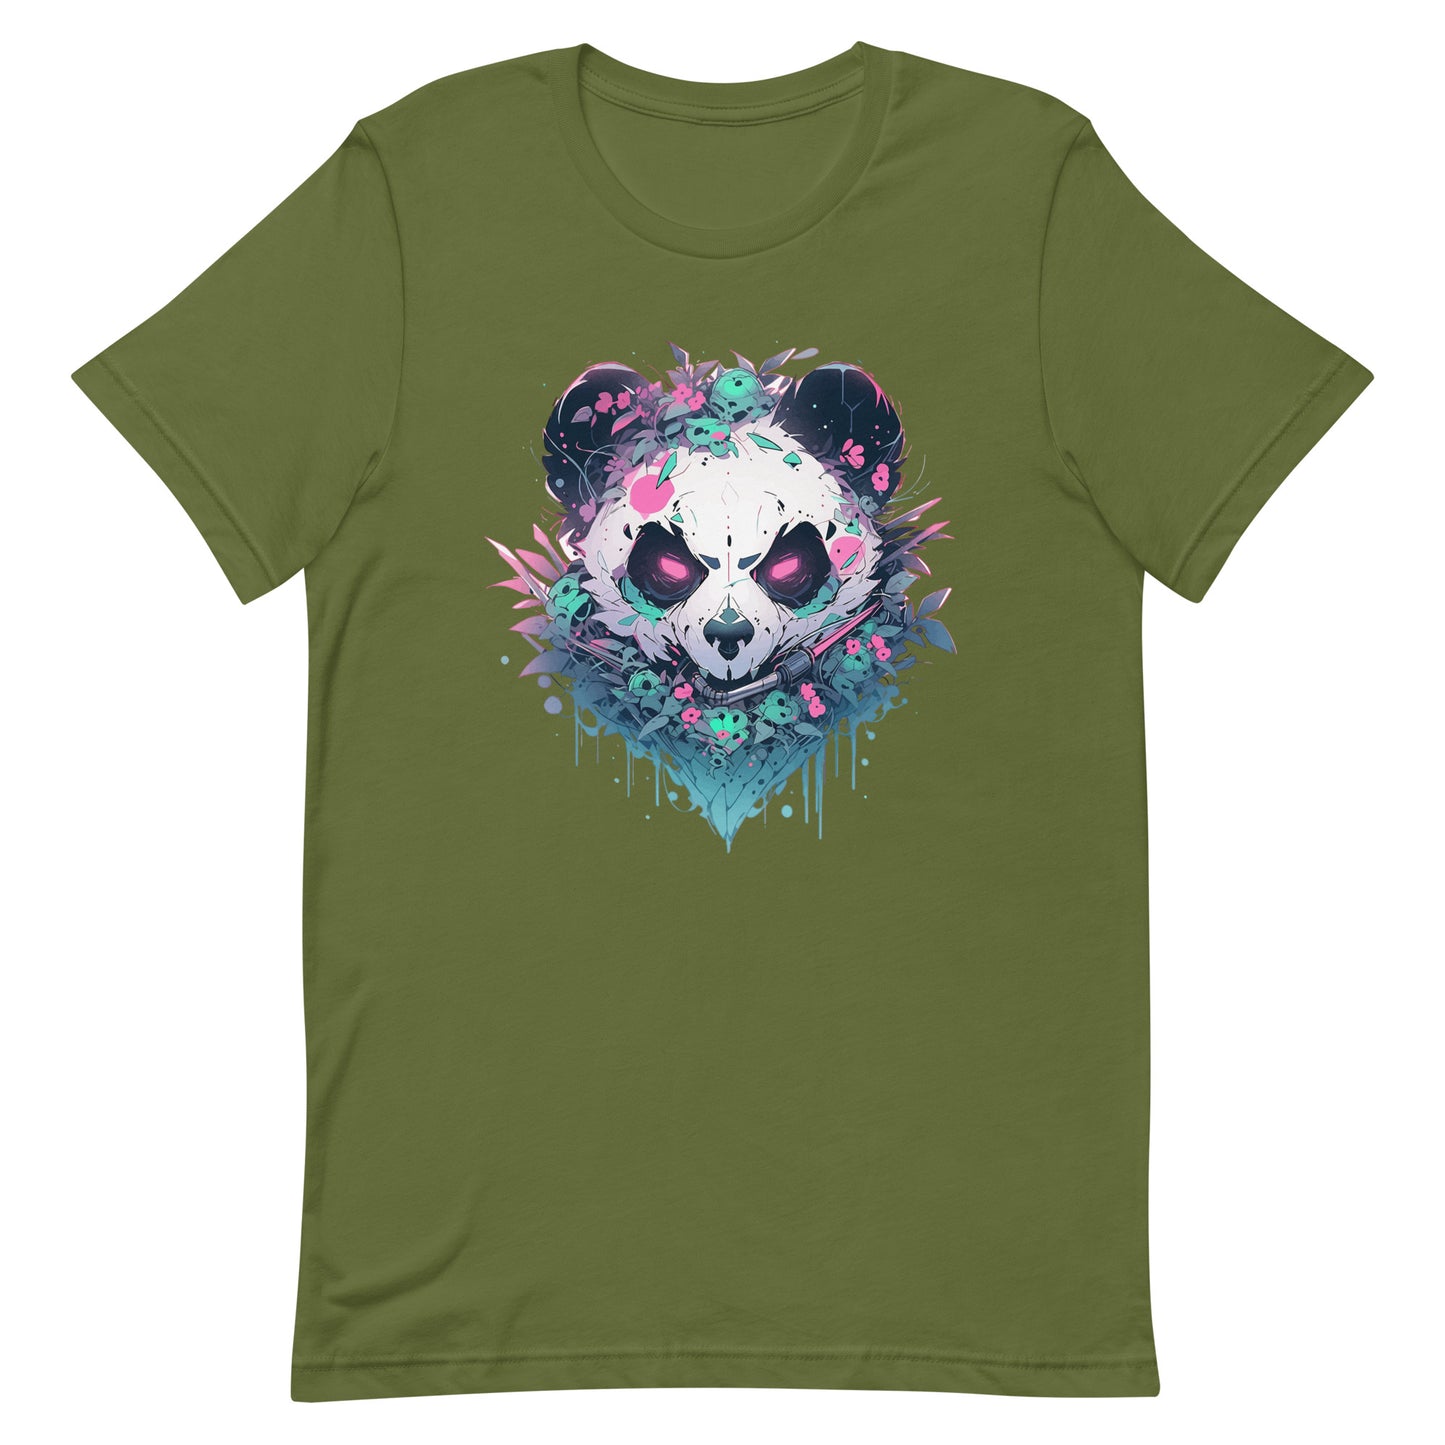 Bamboo bear and jungle, Angry panda in leaves, Black and white bear, Pink eyes animal wild - Unisex t-shirt